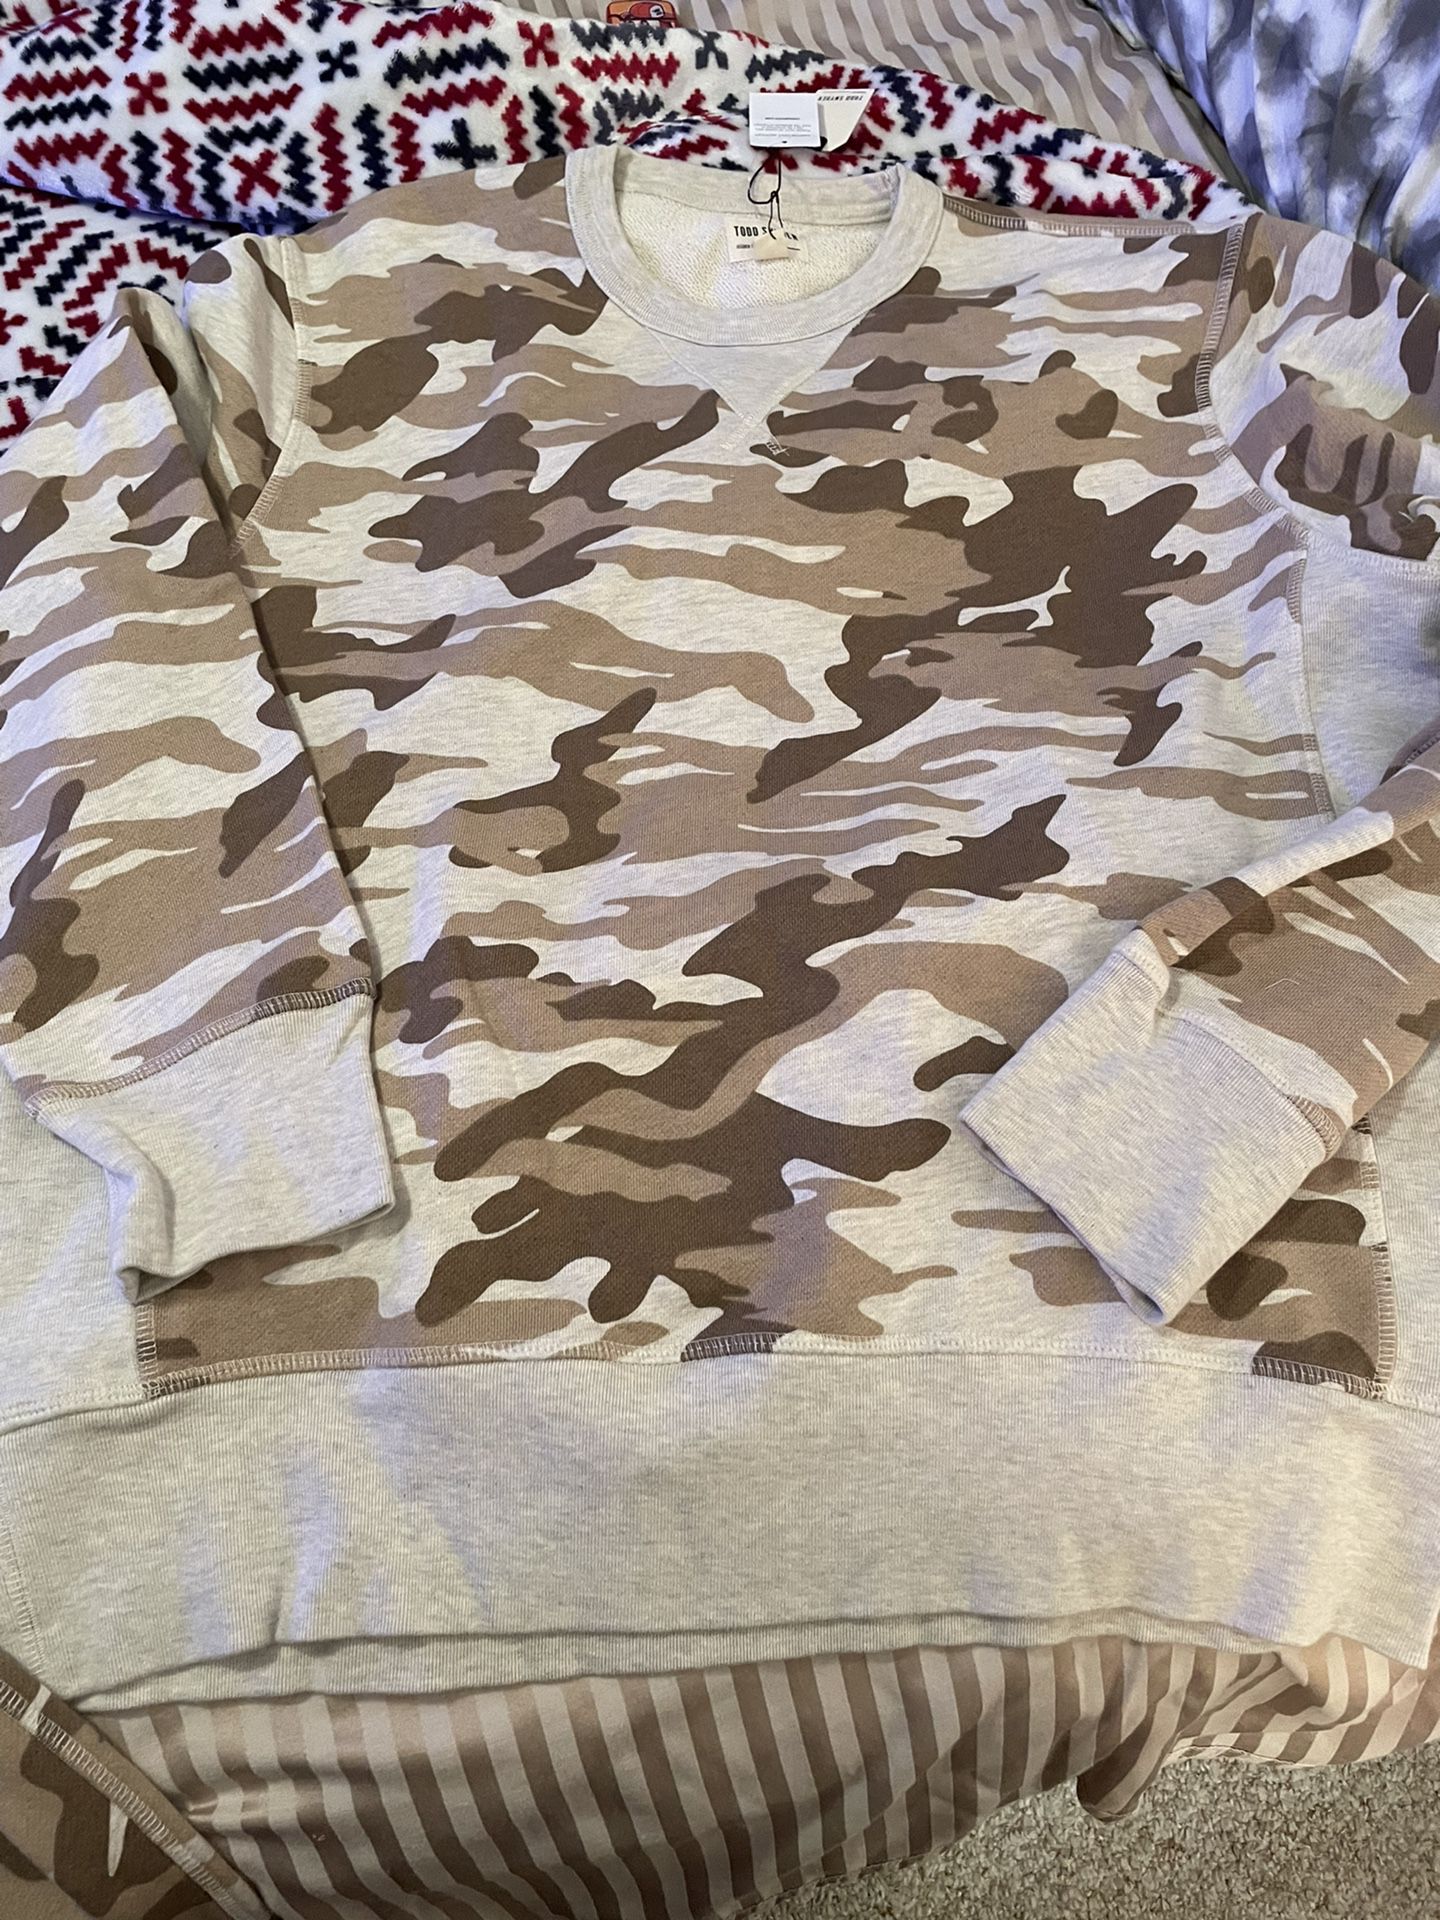 Todd Snyder New With Tags Men’s Sand Camo Sweatshirt And Sweatpants 